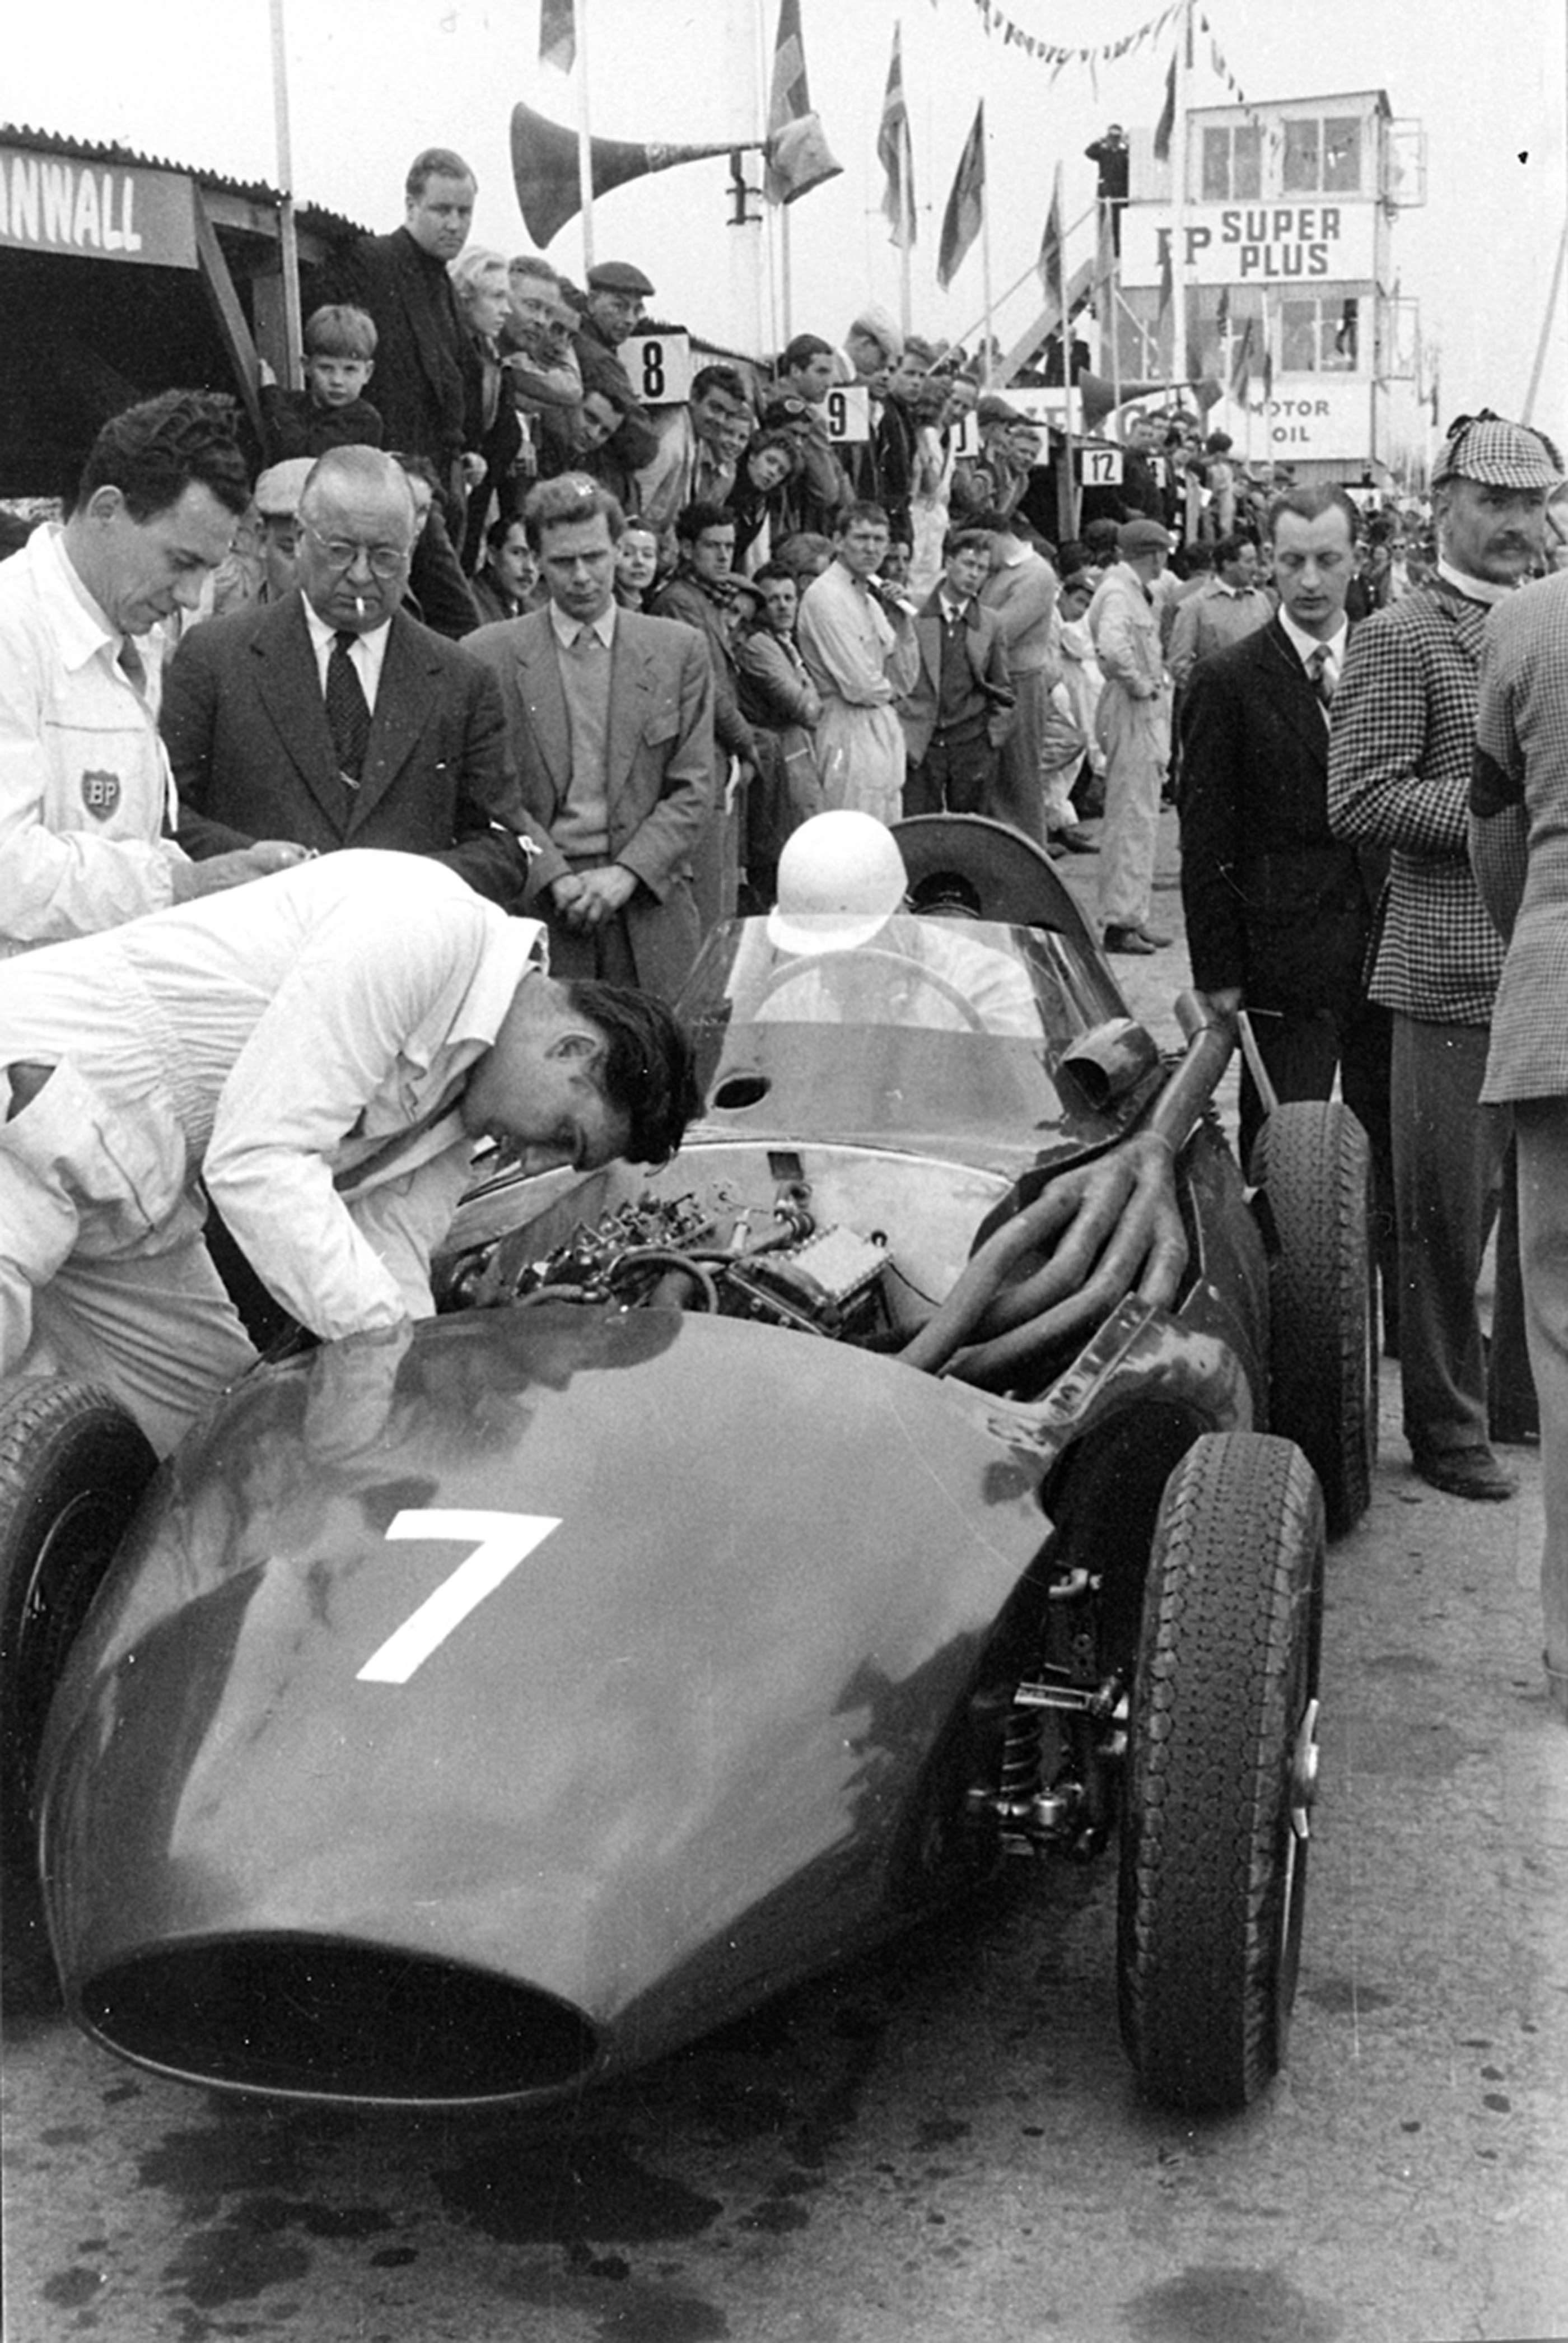 A glum Tony Vandervell looking on in the Goodwood pits as Moss’s throttle linkage failure is investigated. Nobody would dare tell The Old Man not to smoke in the pits...